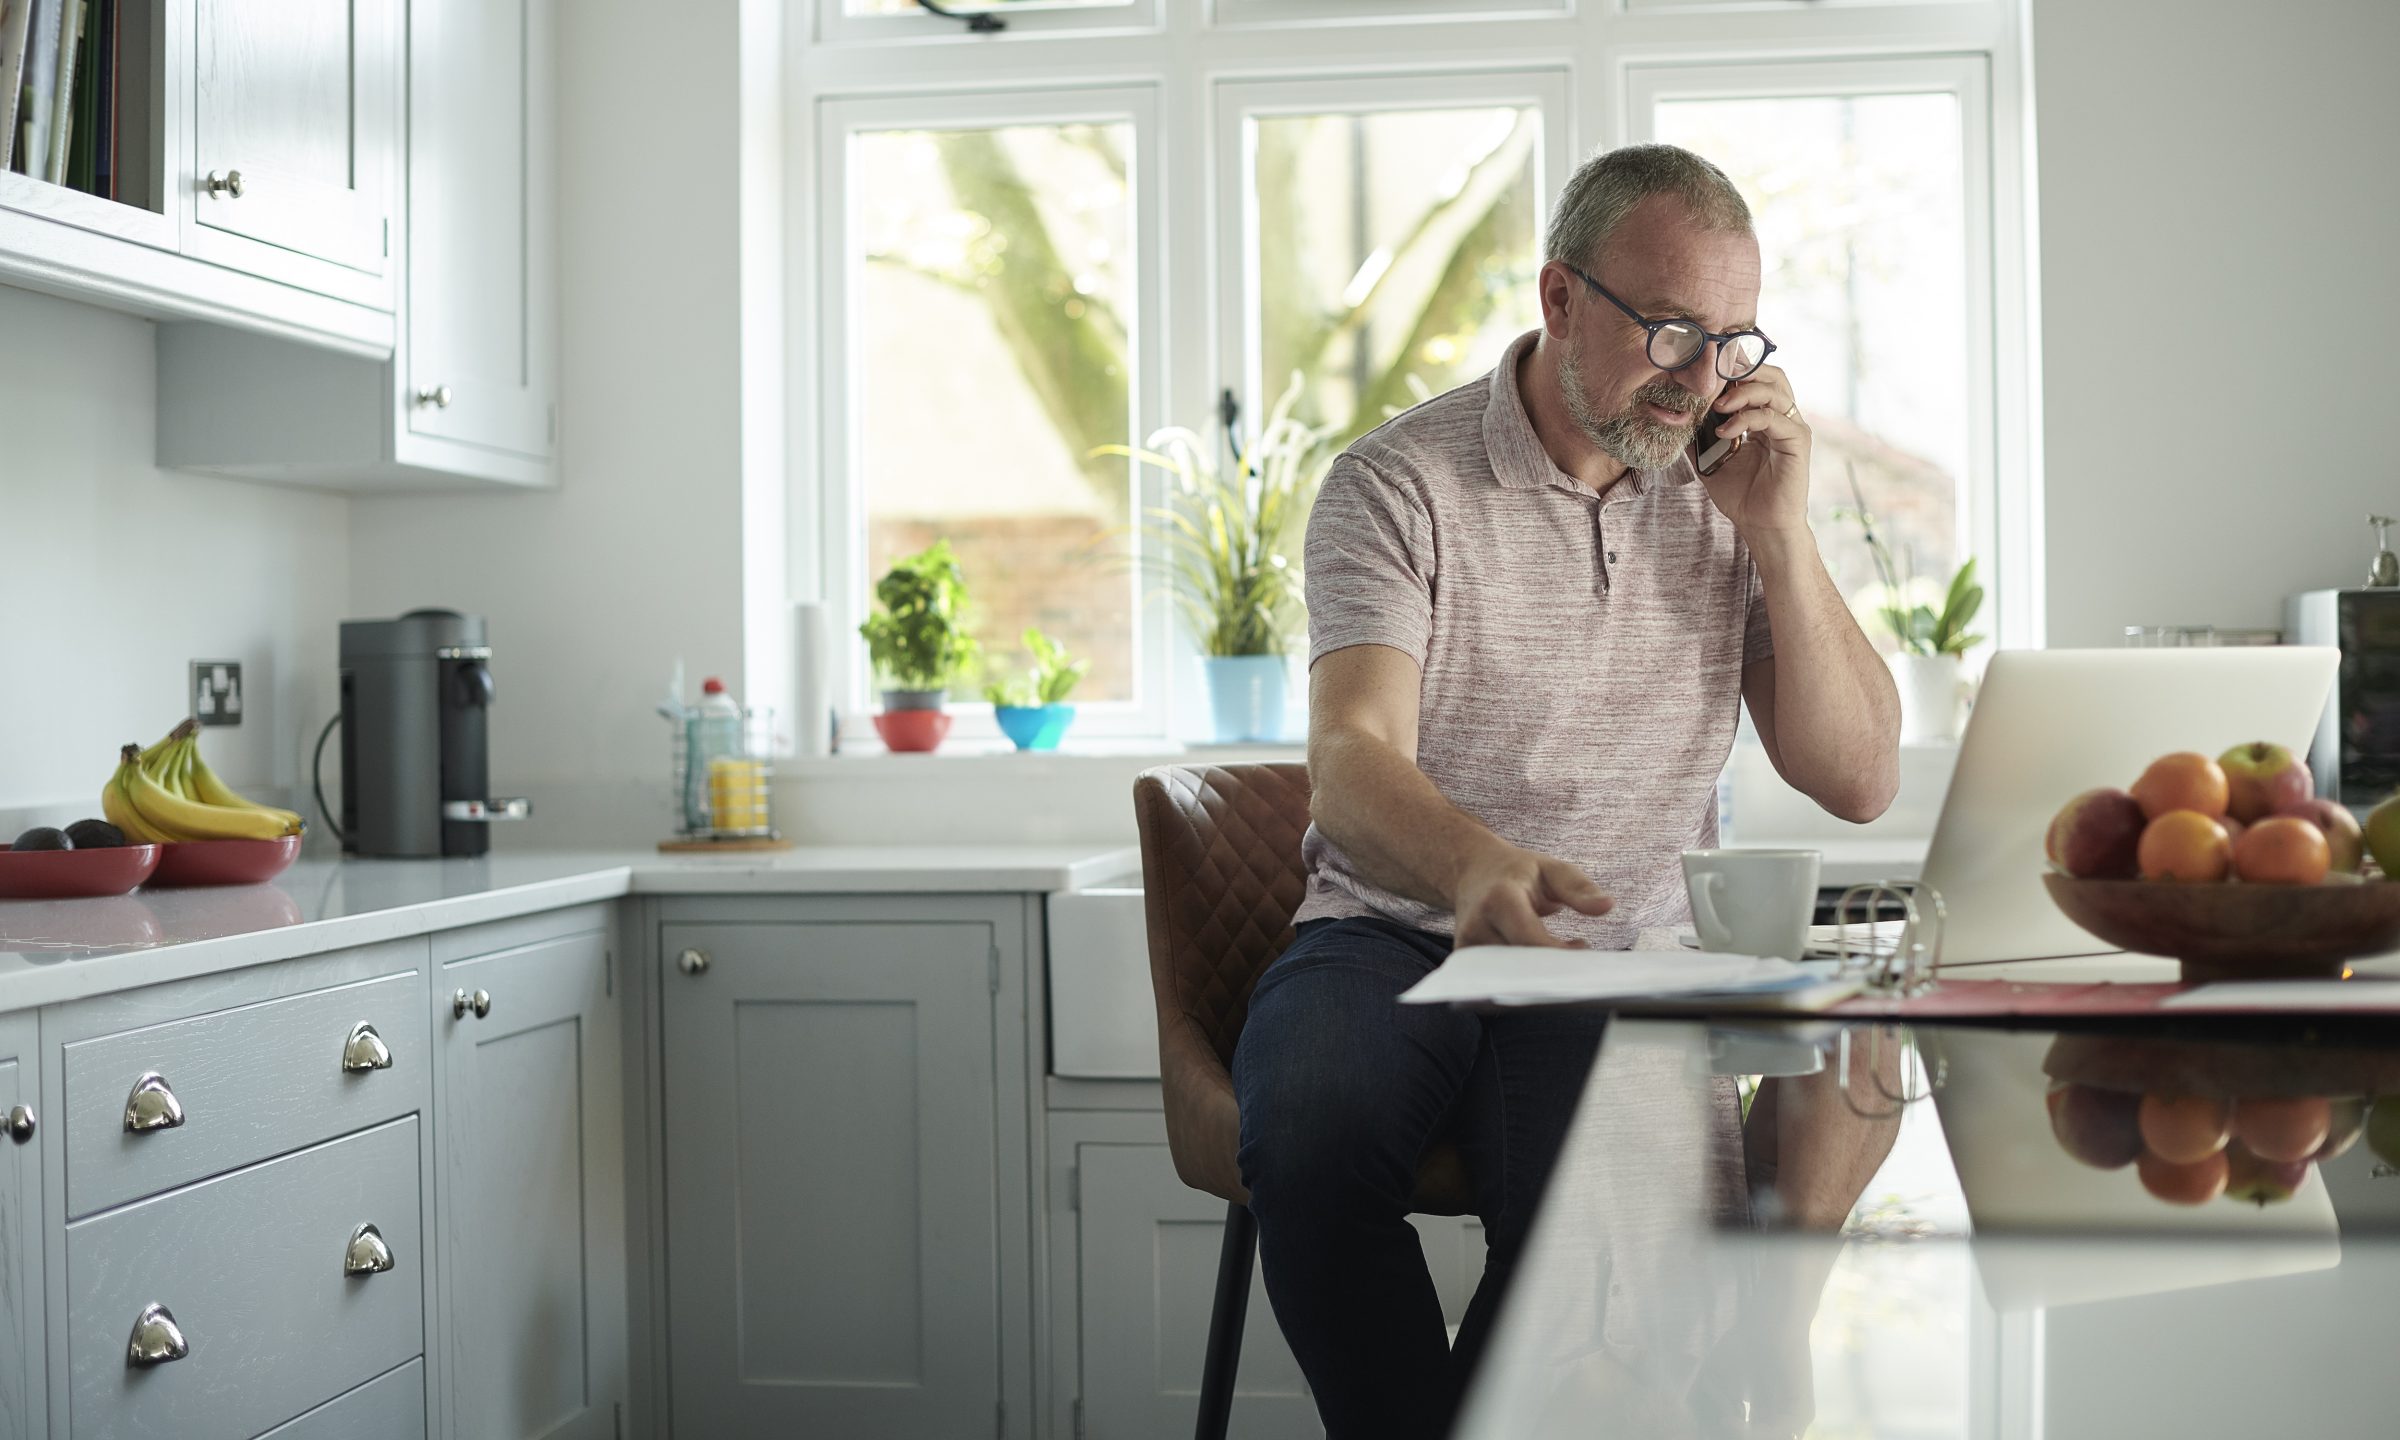 Debt Relief: Understand Your Options and the Consequences - NerdWallet